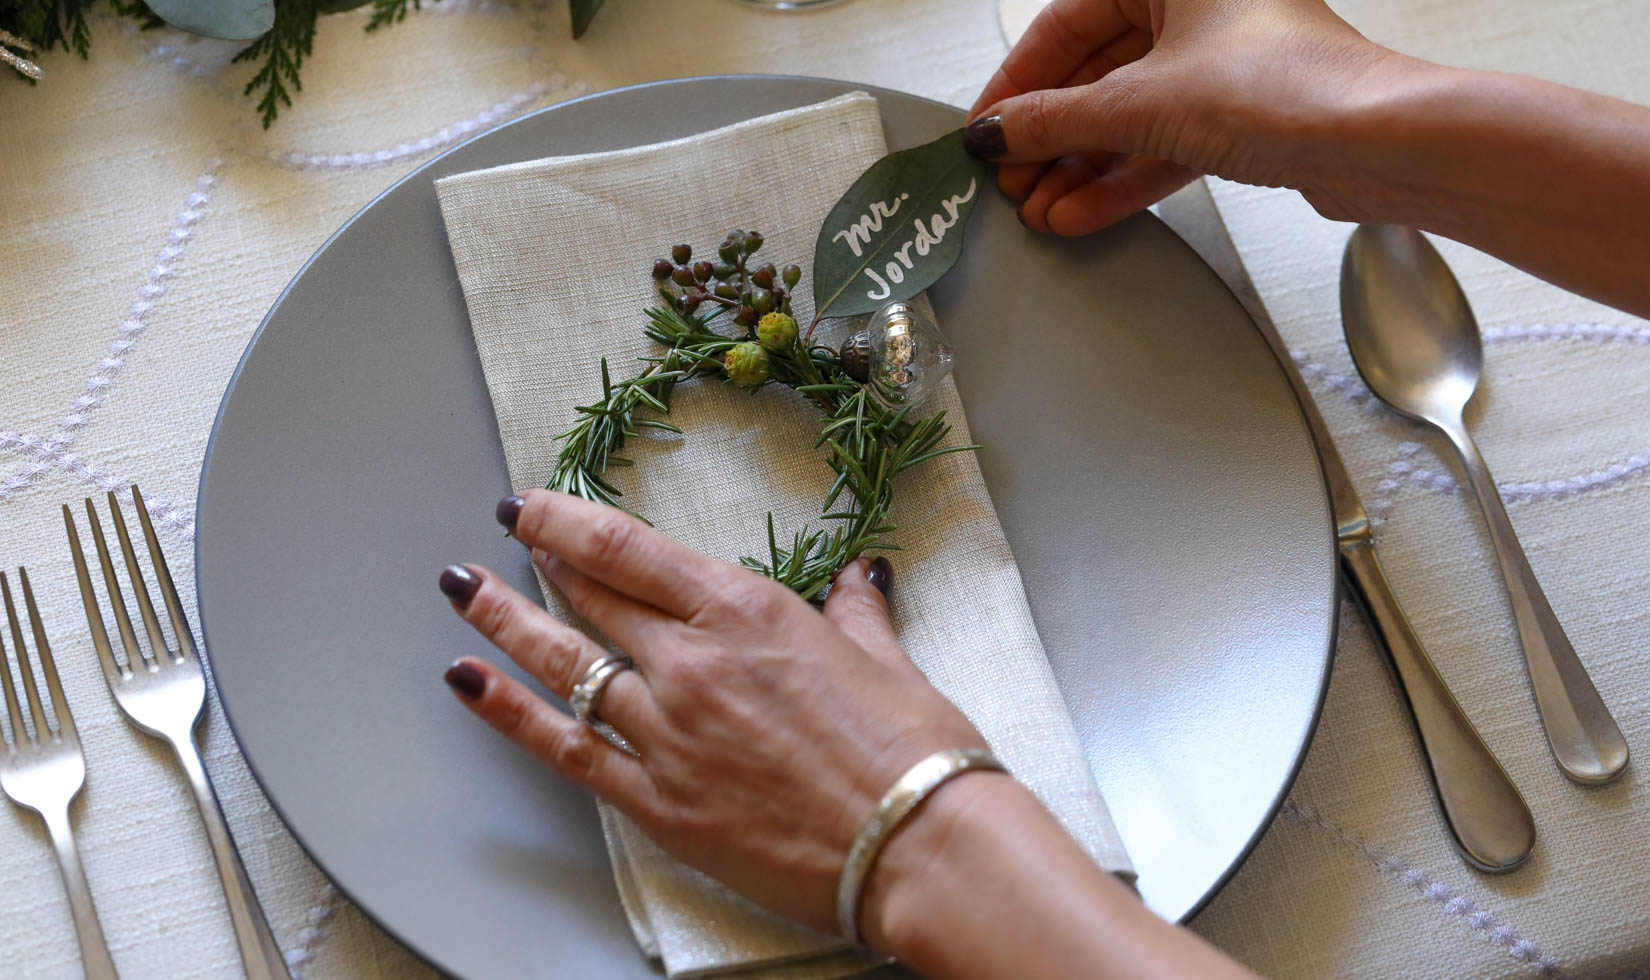 hands adjusting a mini rosemary wreath with a leaf name tag on a holiday place setting